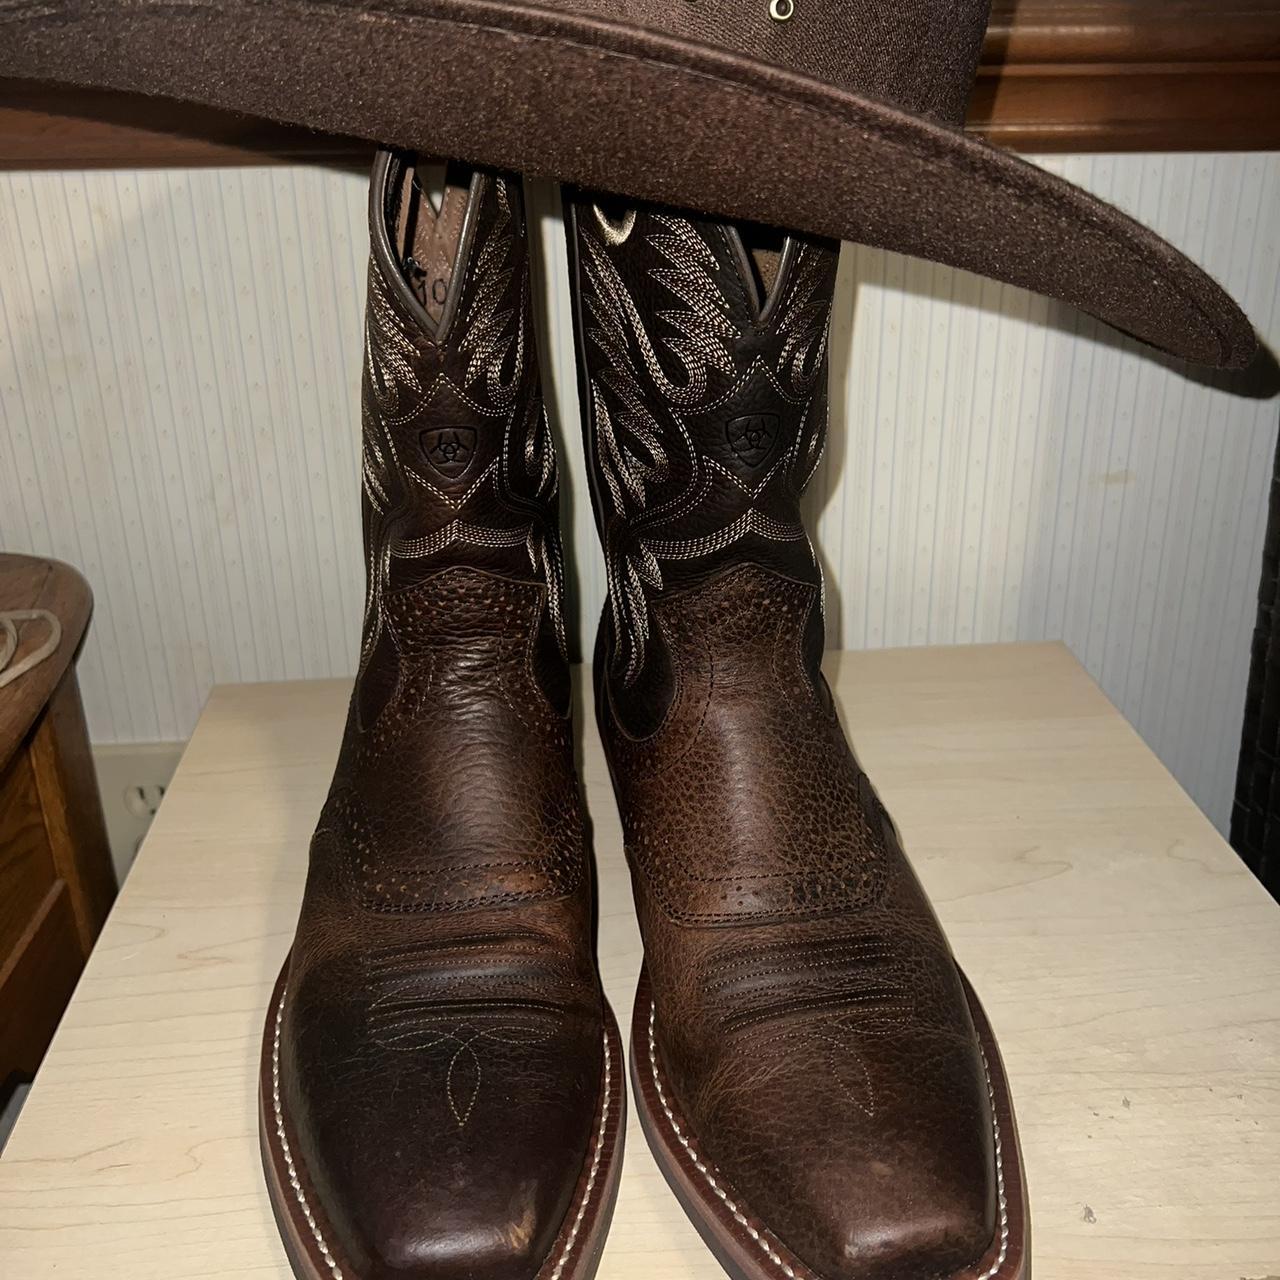 Men's size 10 Ariat boots from boot barn and a L/XL - Depop